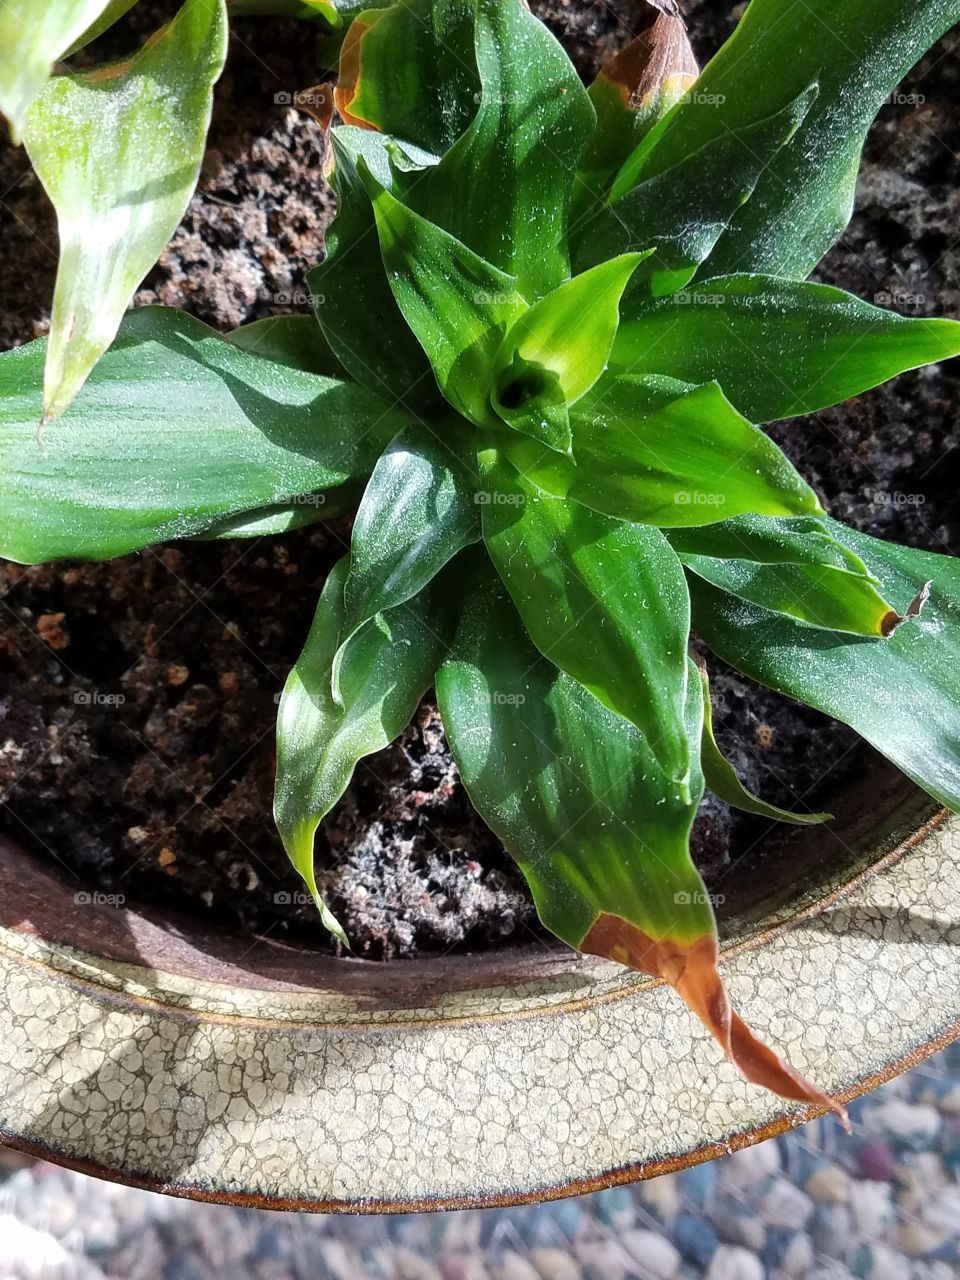 Potted house plant, close up